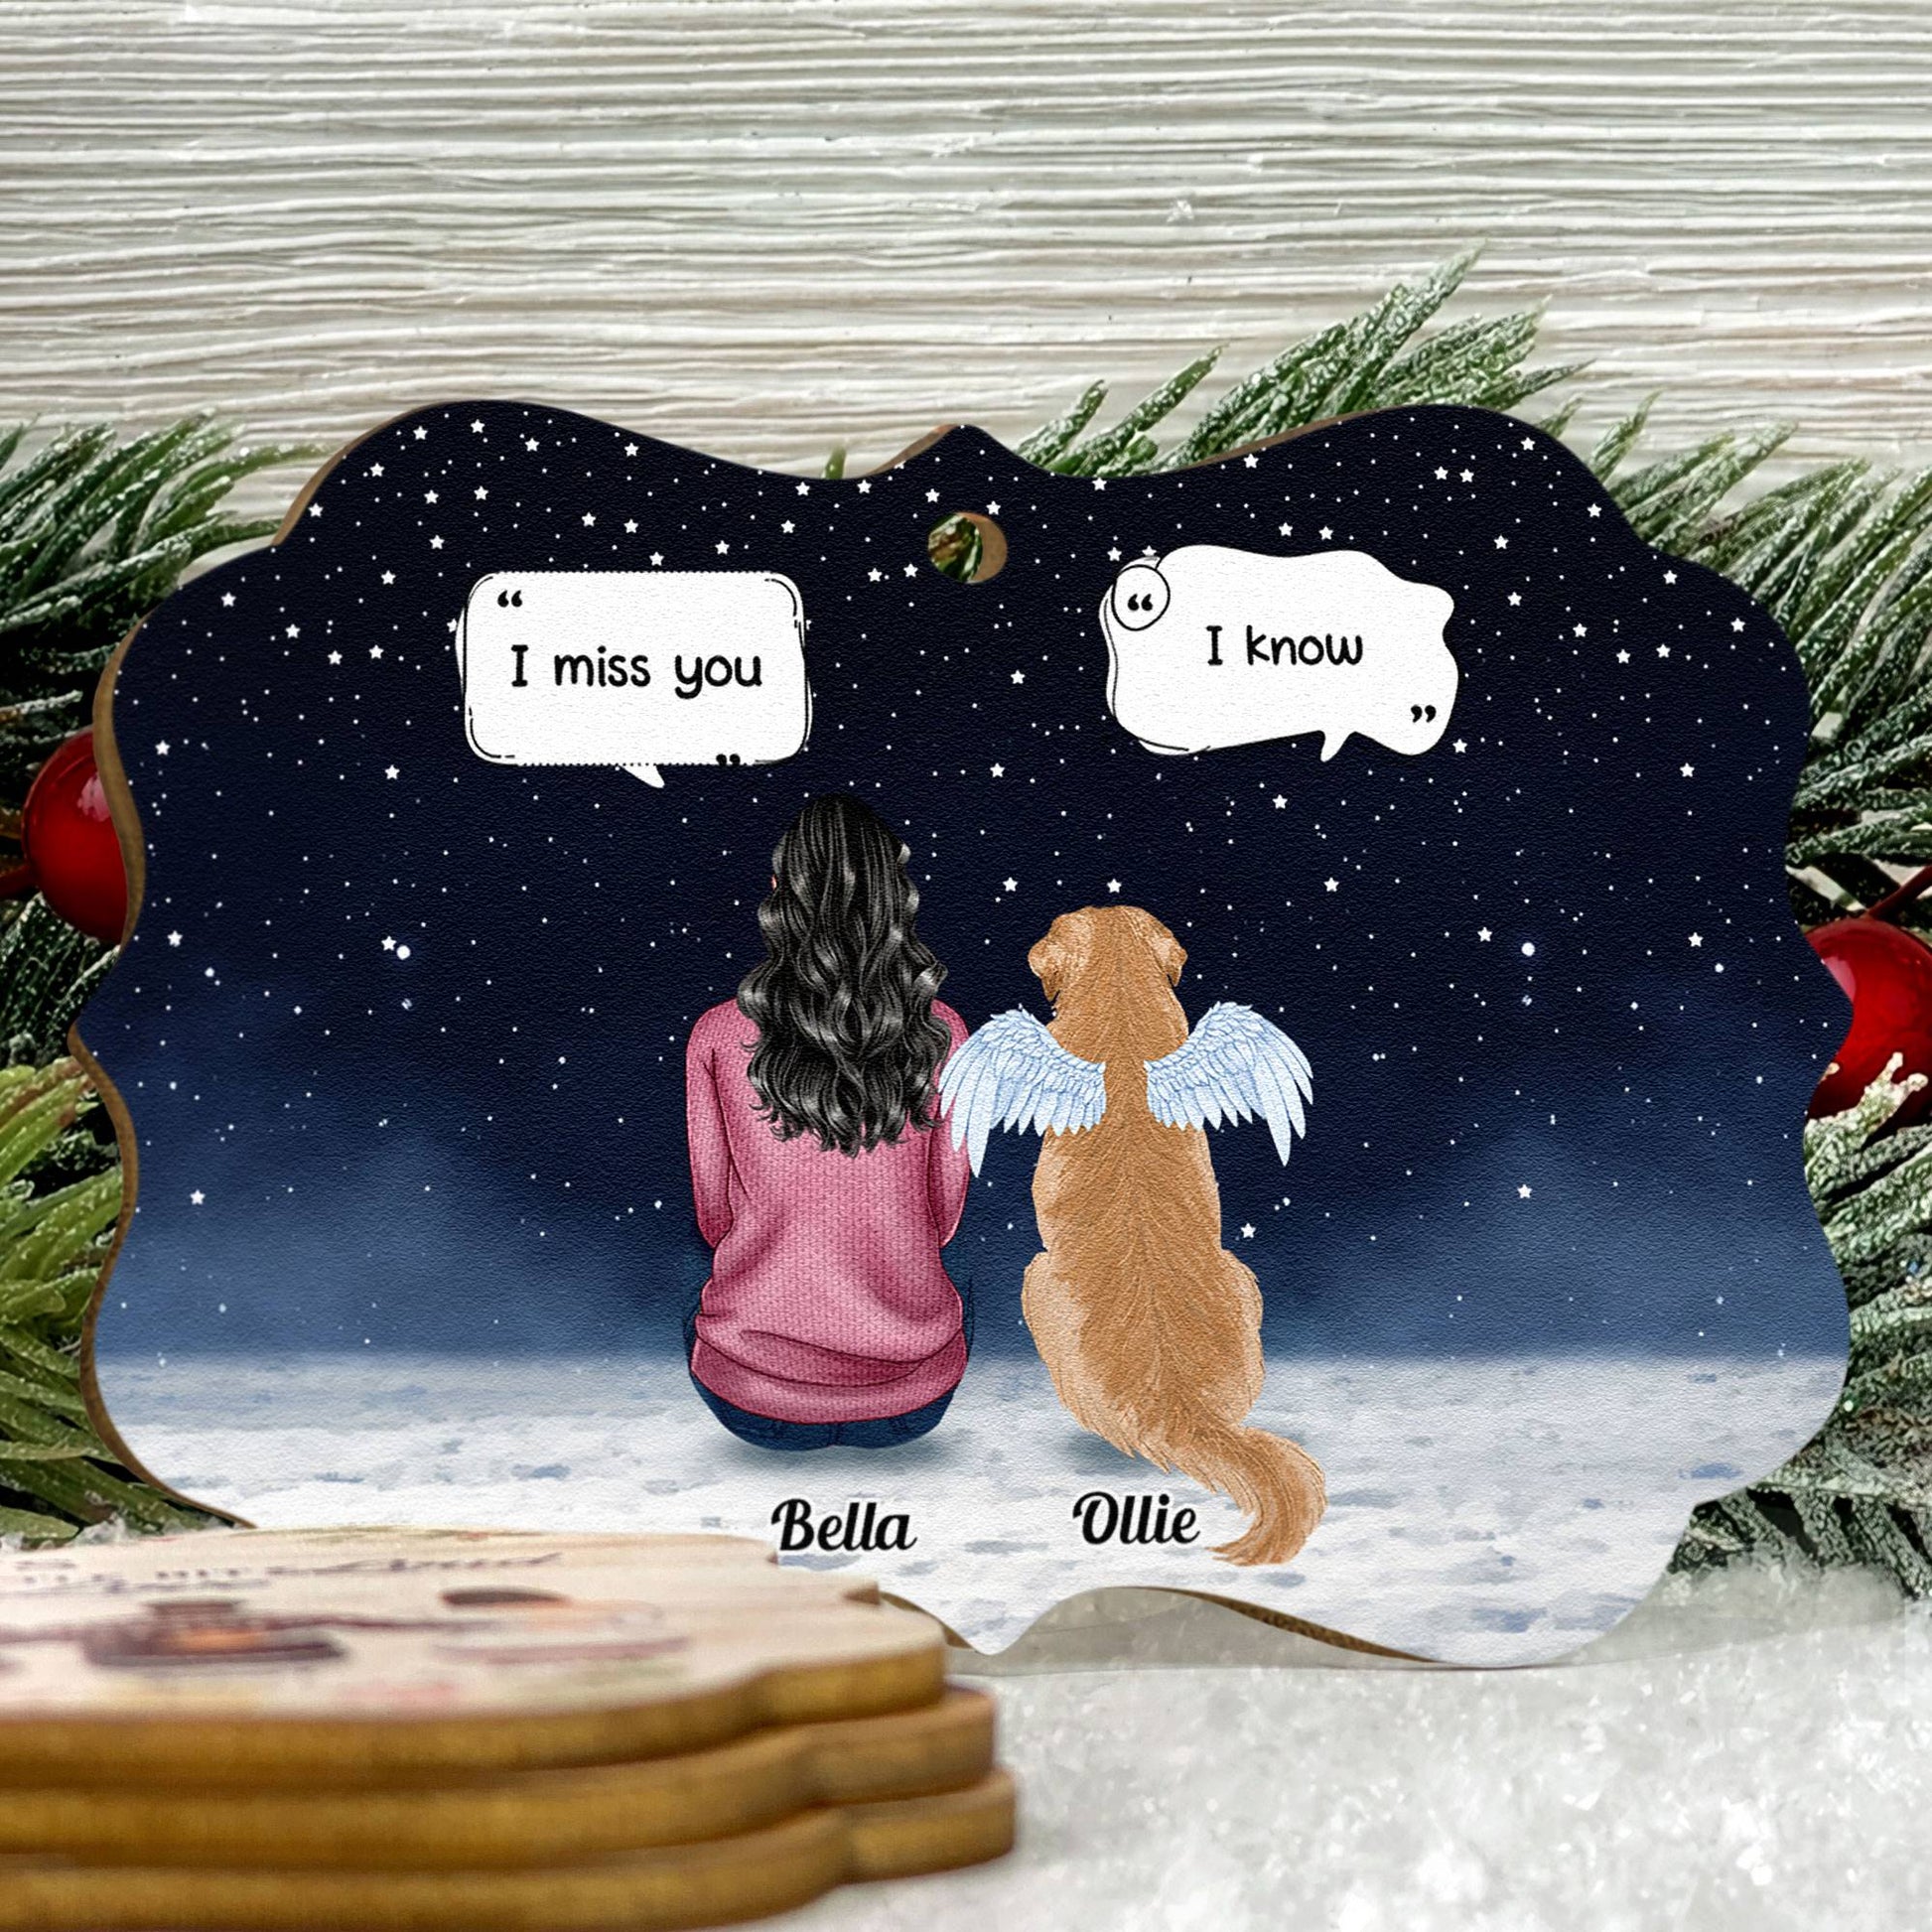 Memorial Pet - Personalized Alumium/wooden Ornament - Christmas, Memorial, Loving Gift For Pet Loss Owners, Dog Mom, Dog Dad, Cat Mom, Cat Lover, Dog Lover